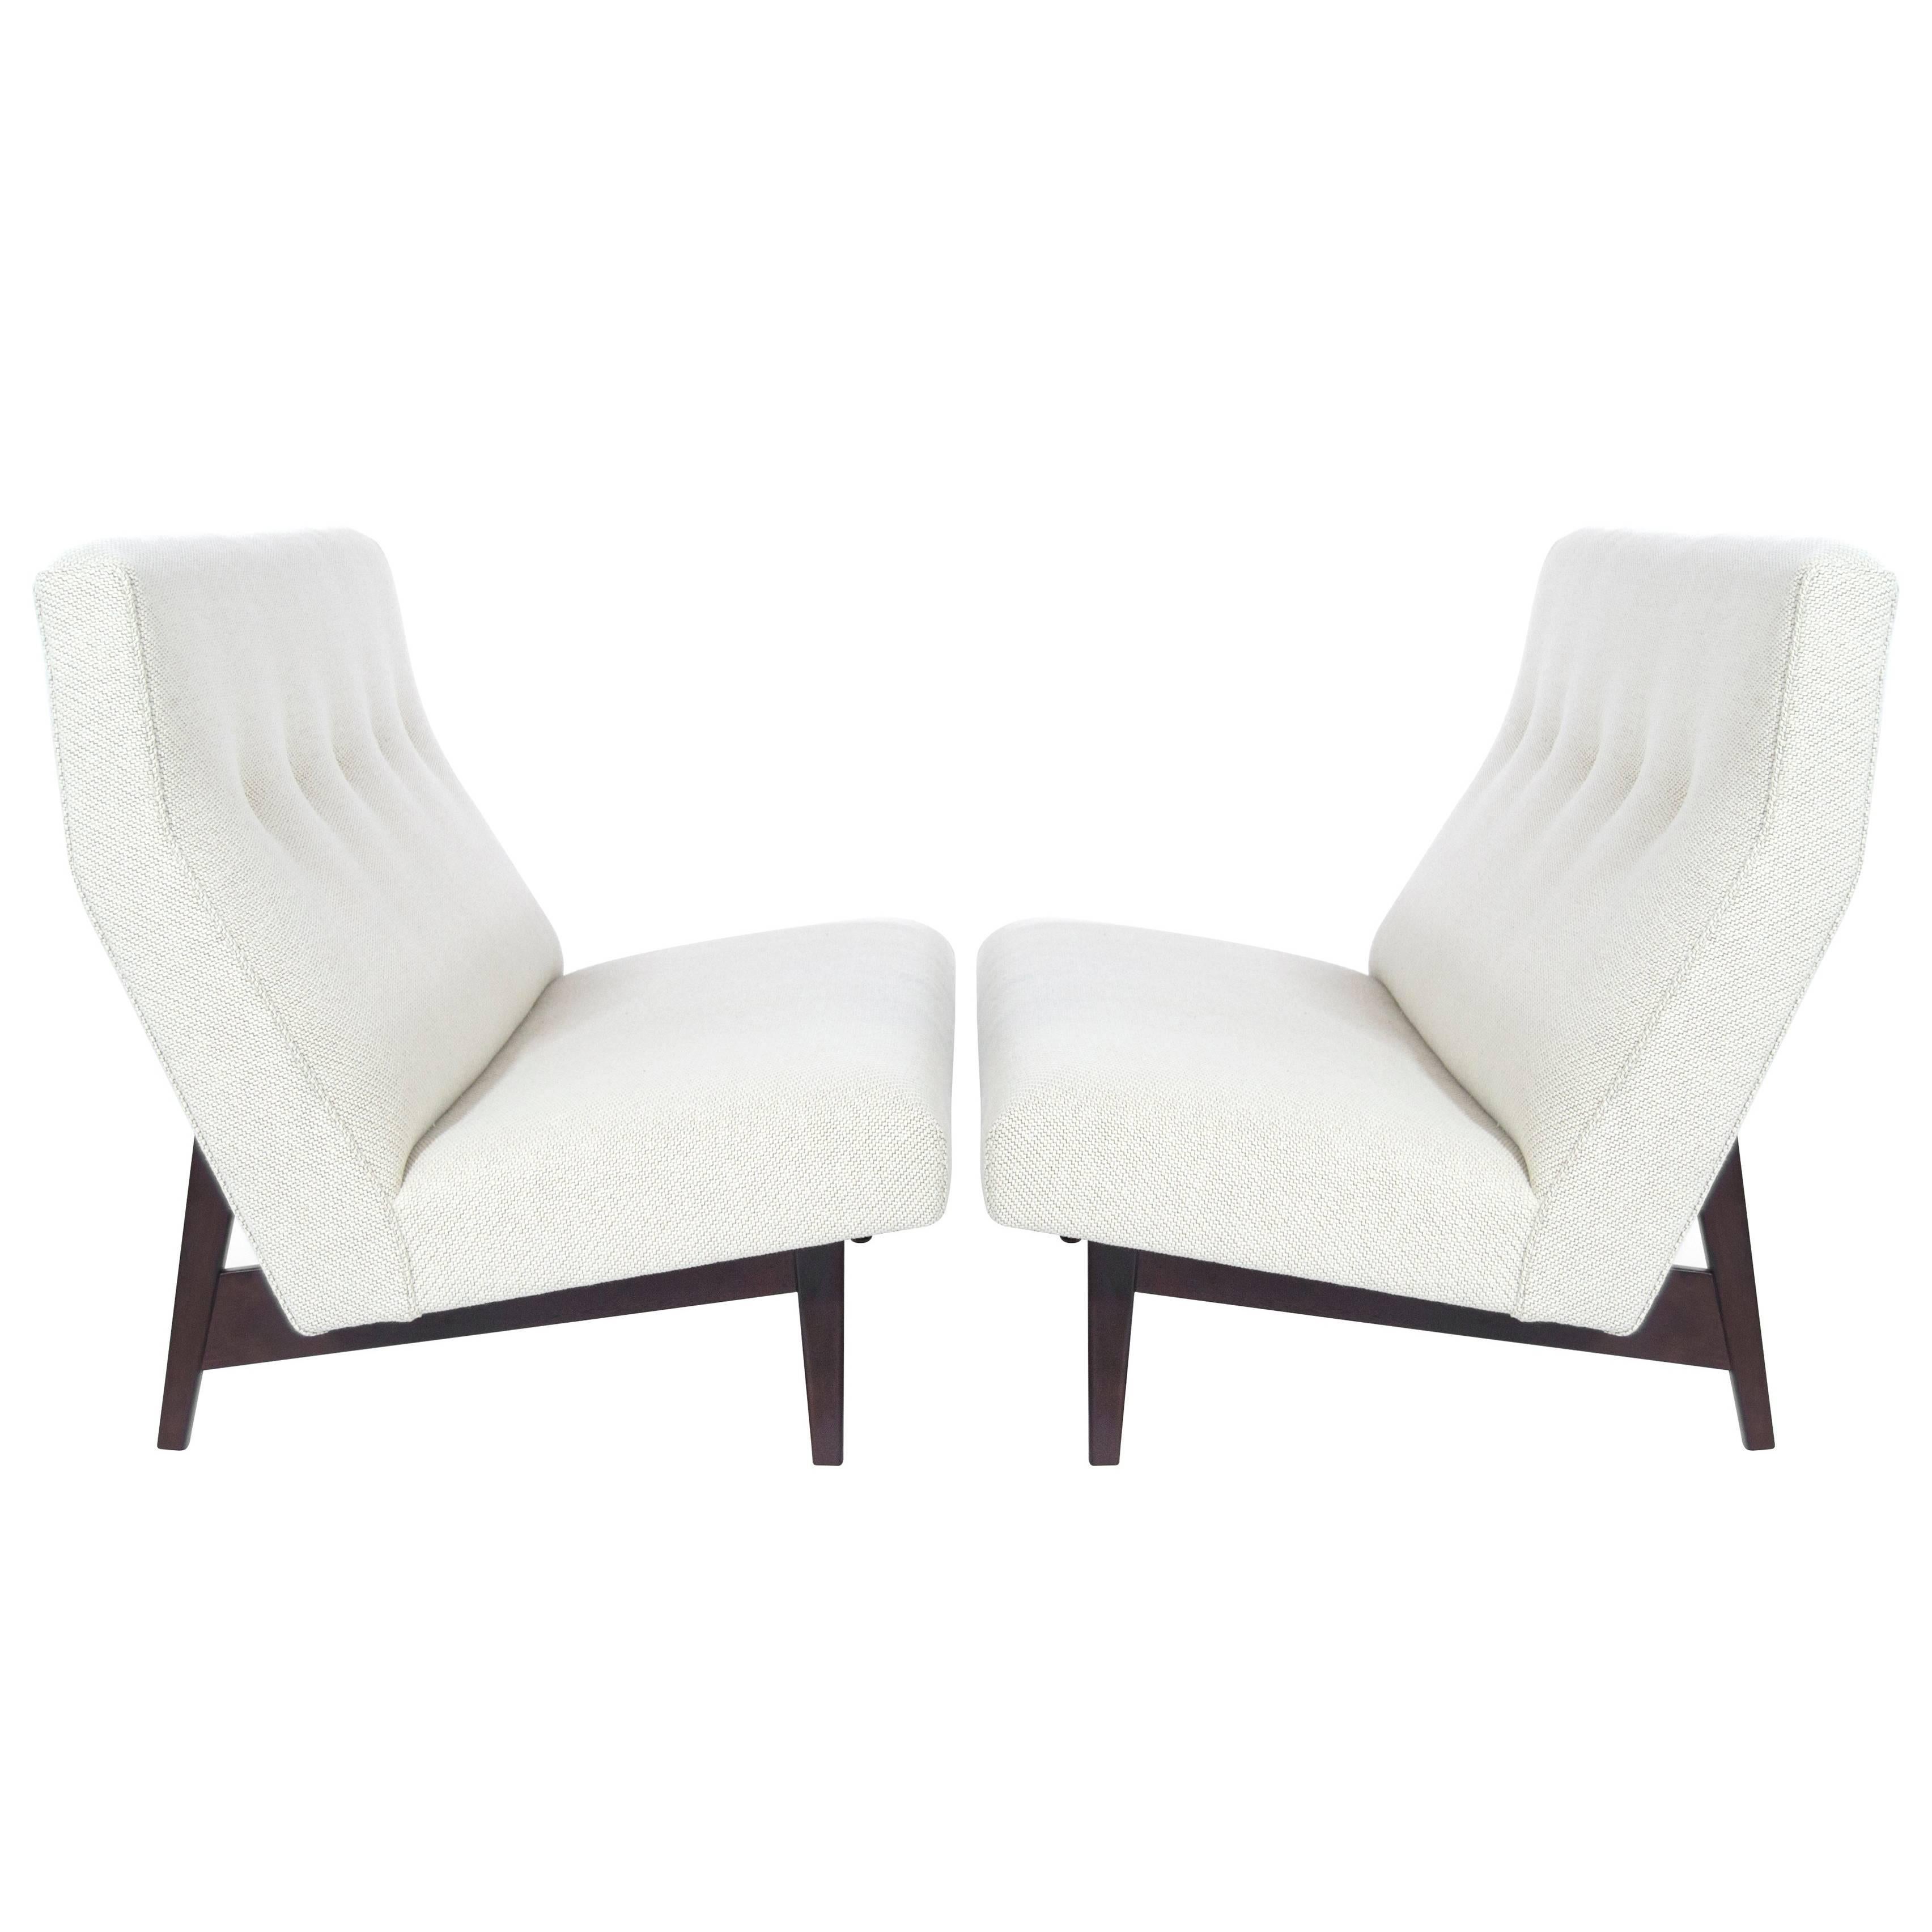 Stunning and rare pair of Jens Risom for Jens Risom designs pair of loveseats, model U-251, circa 1950s. Sculptural walnut bases have been completely restored. Newly upholstered in an off-white Maharam/Kvadrat Coda soft wool.

Priced individually.